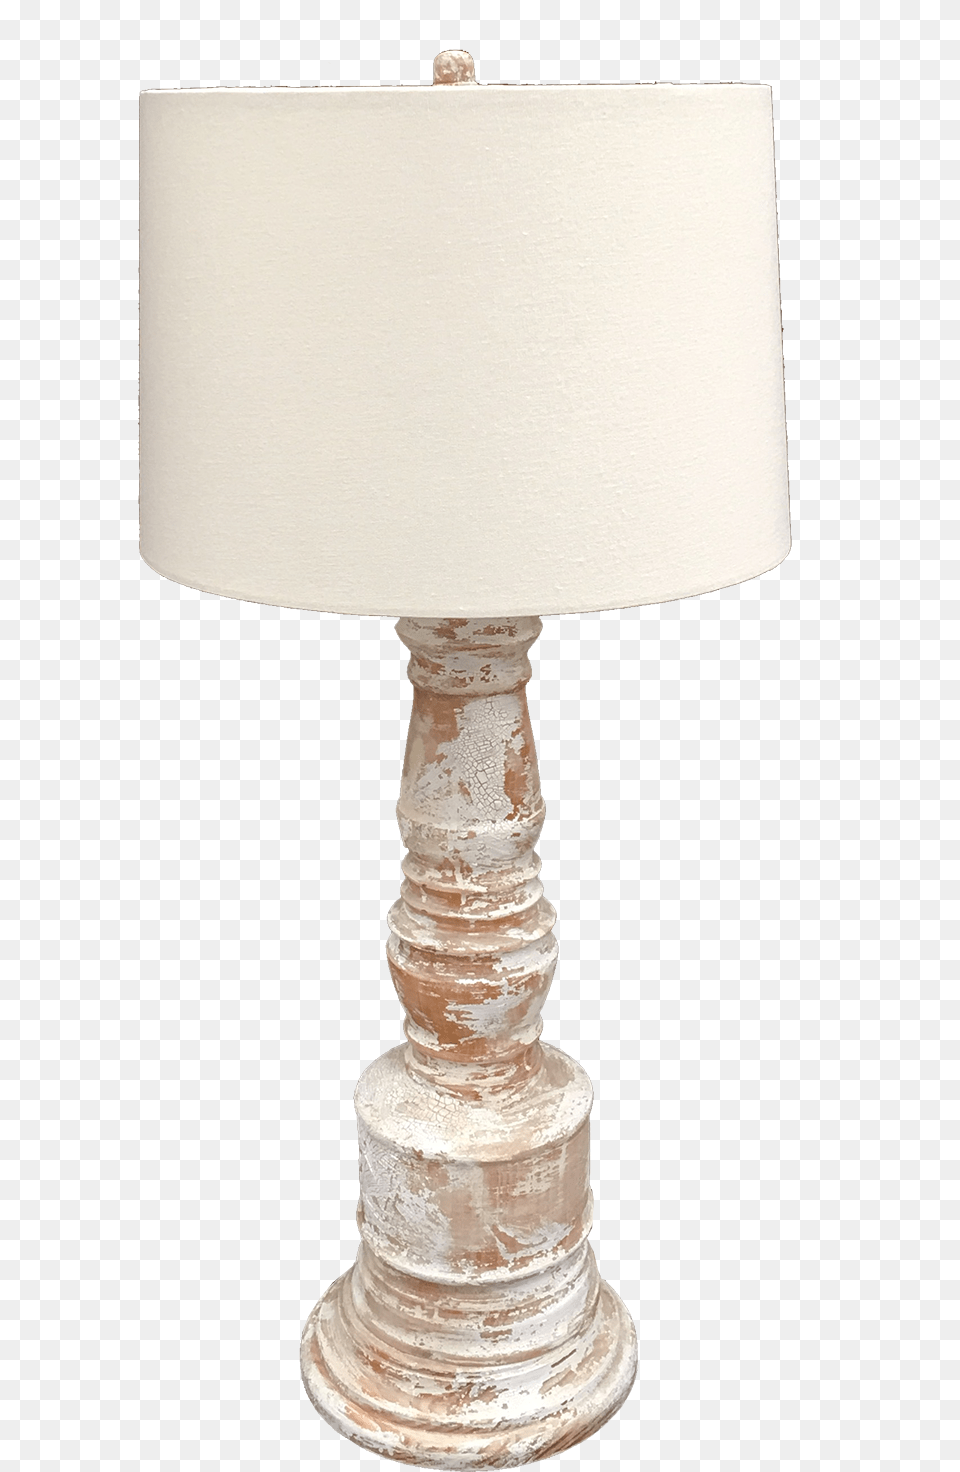 Download Twinkle Lights Desk Lamp, Lampshade, Table Lamp Png Image